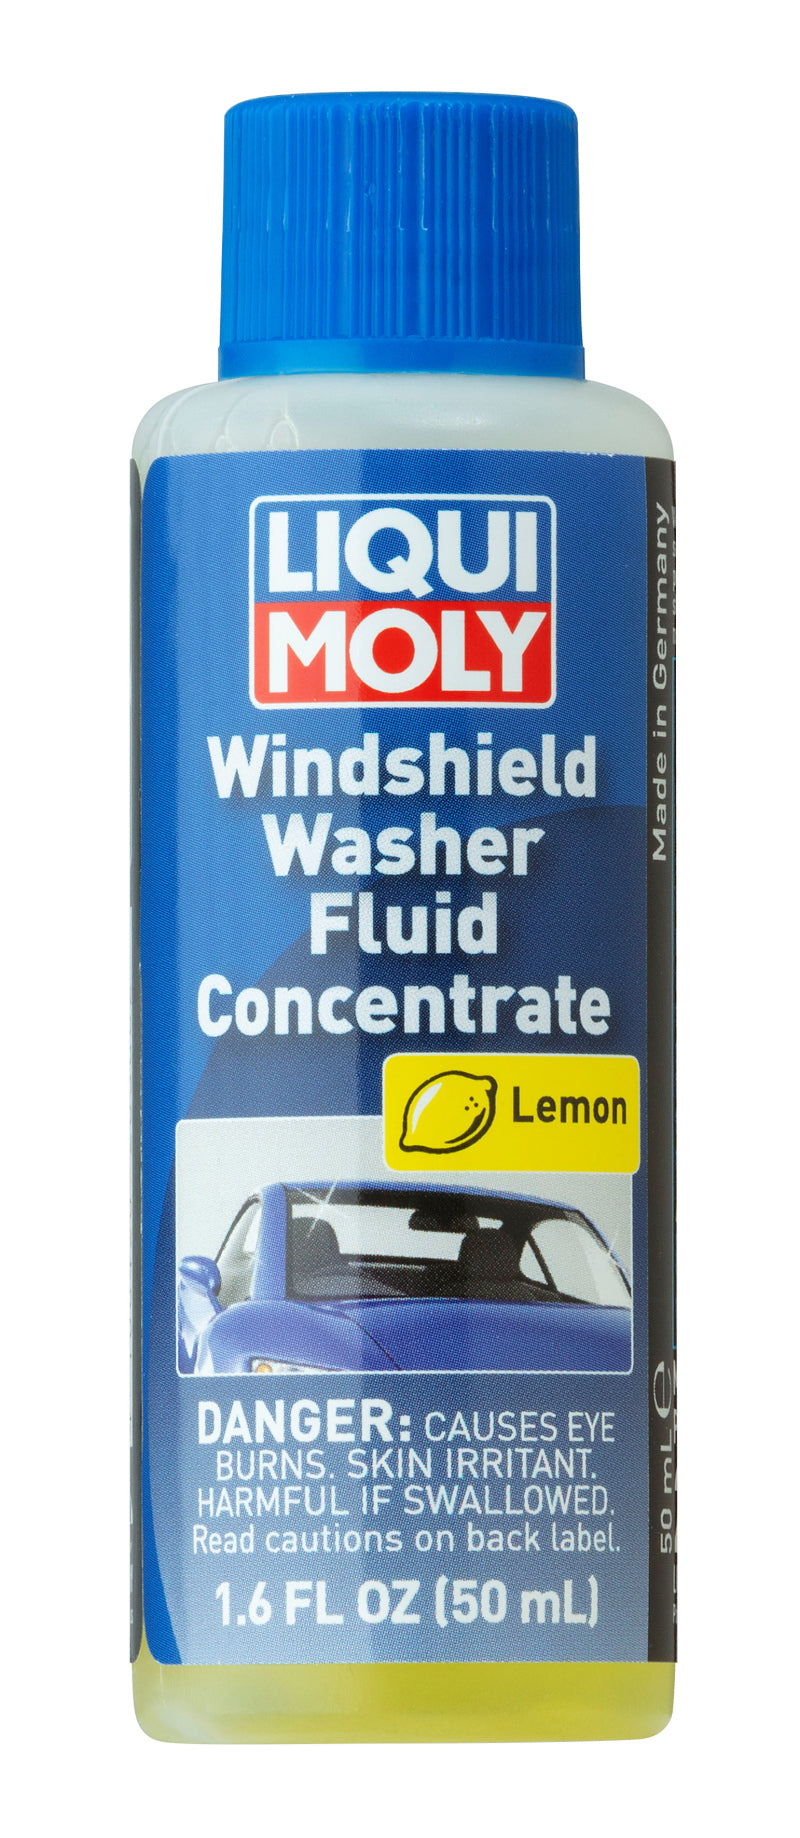 LIQUI MOLY 50mL Windshield Washer Fluid Concentrate 20386